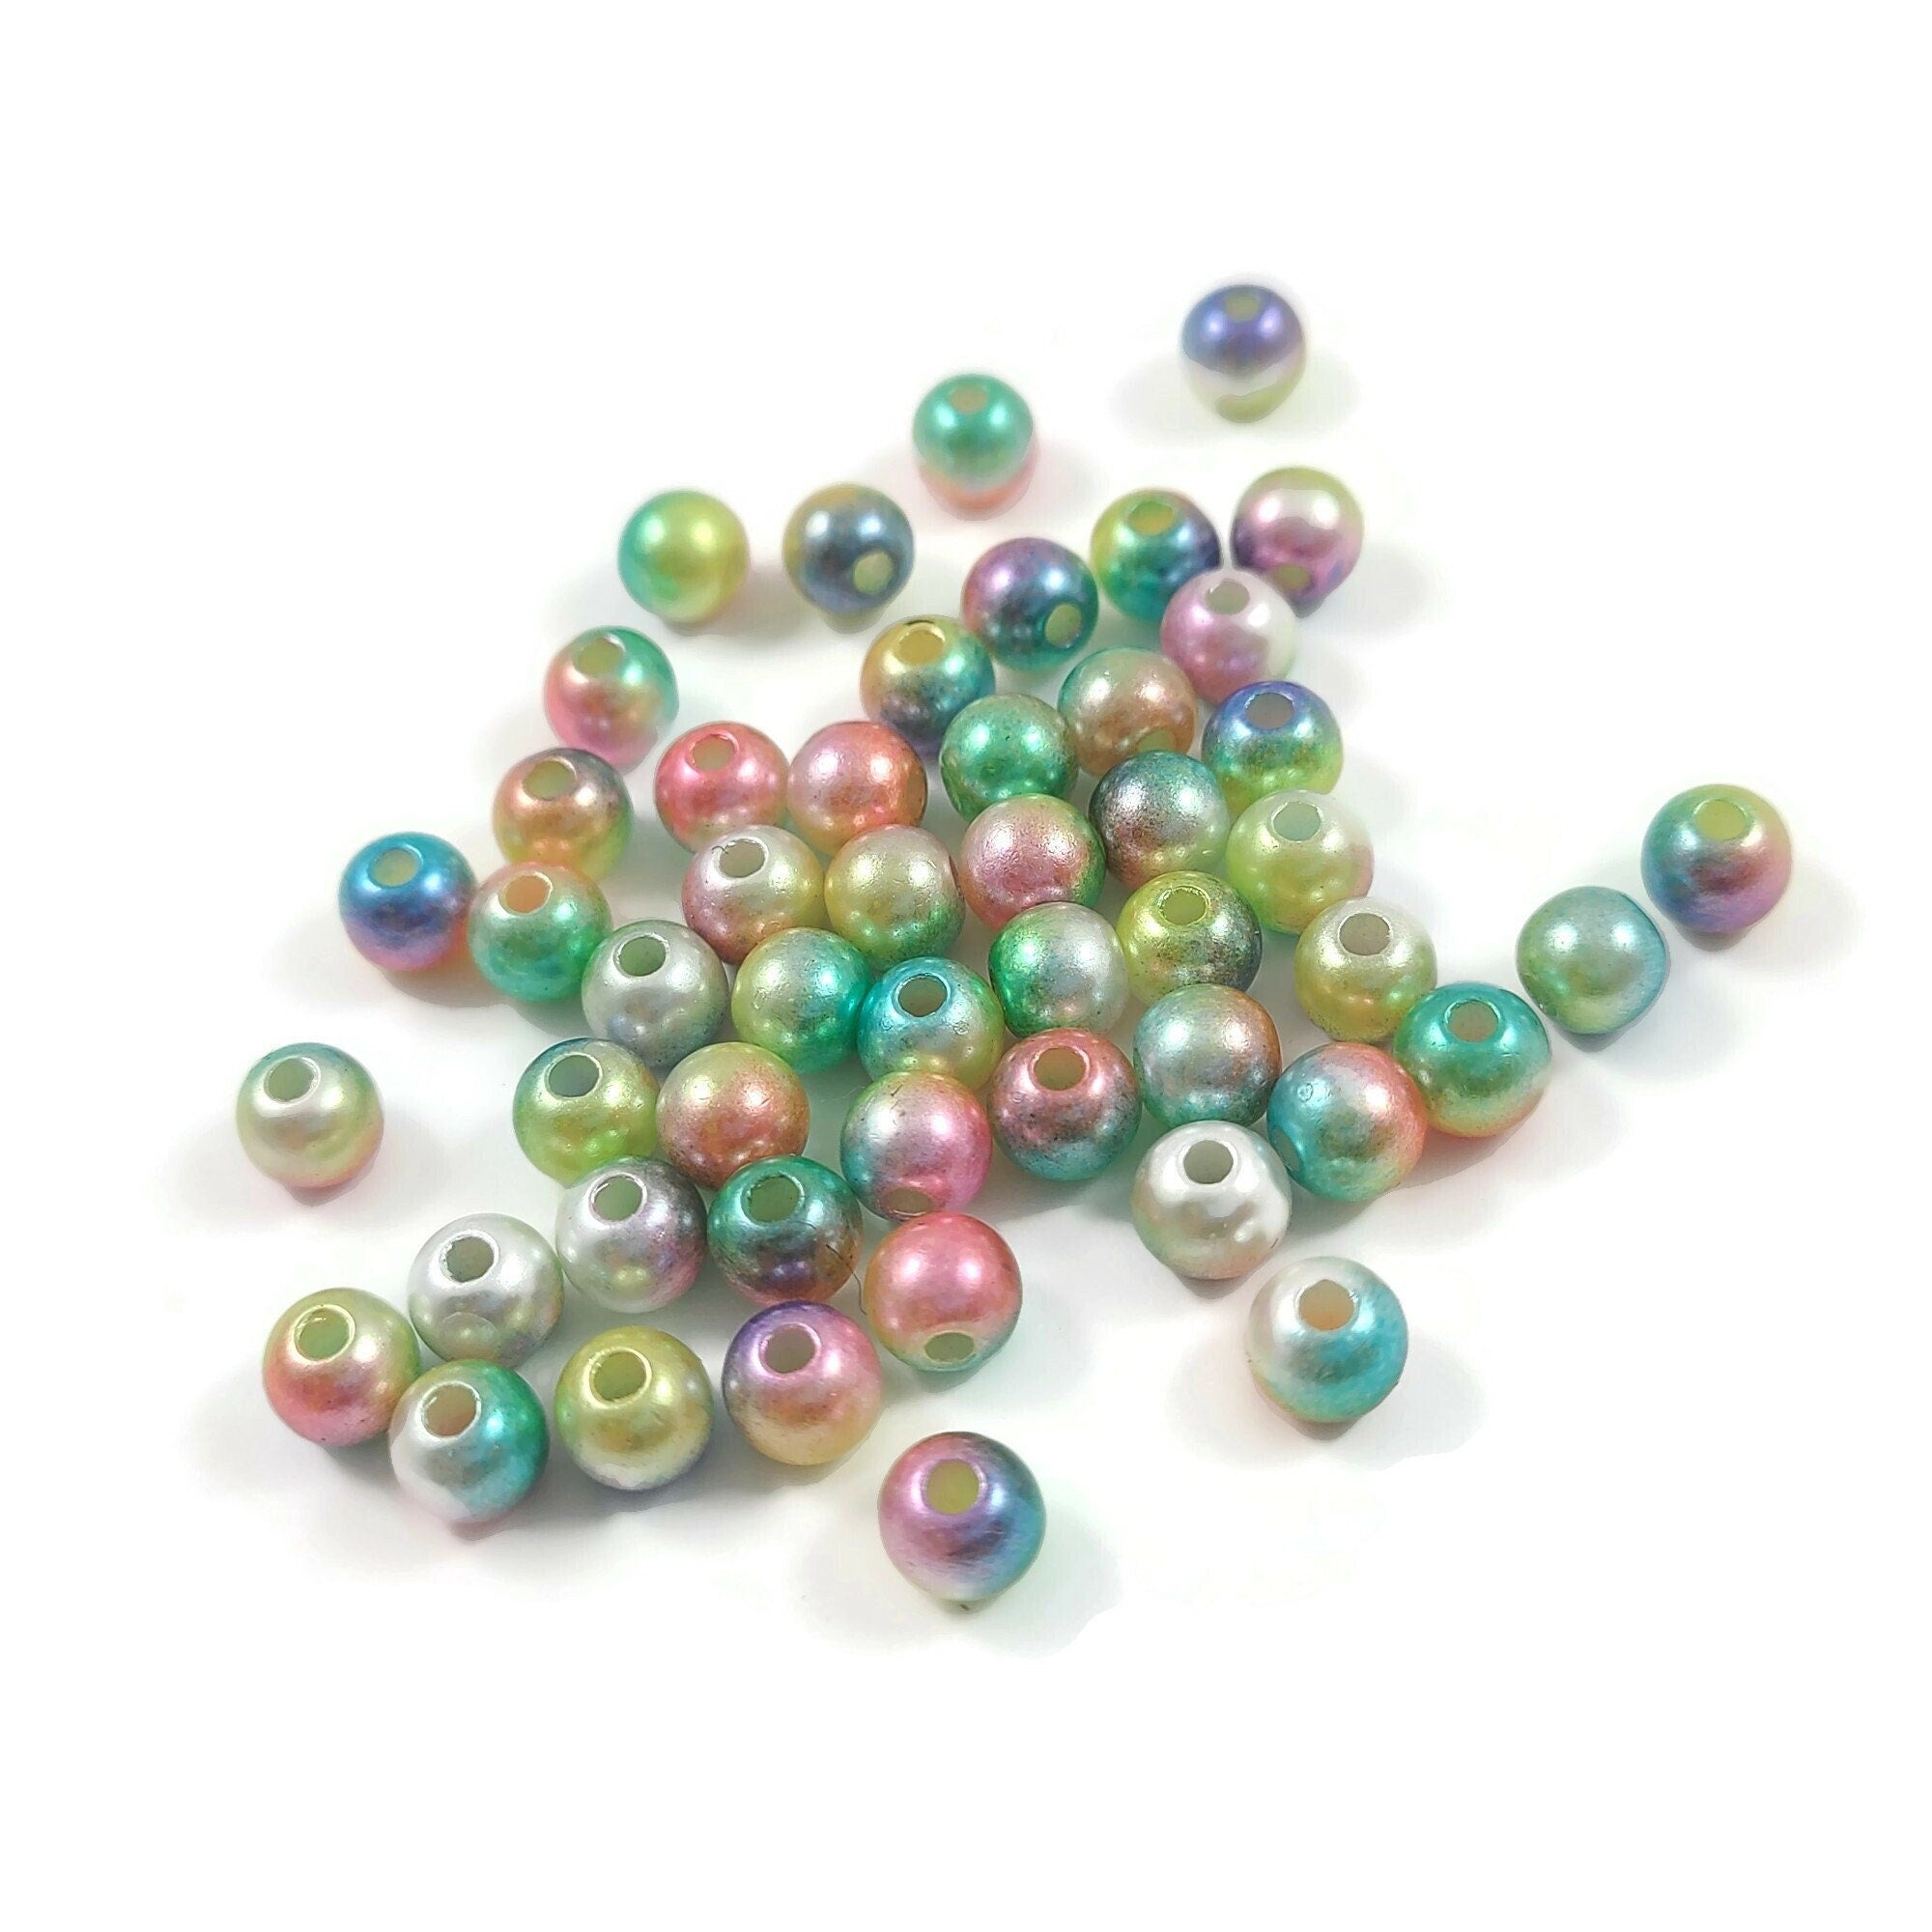 50 rainbow pearly gradient beads, Assorted 6mm plastic beads for jewelry making